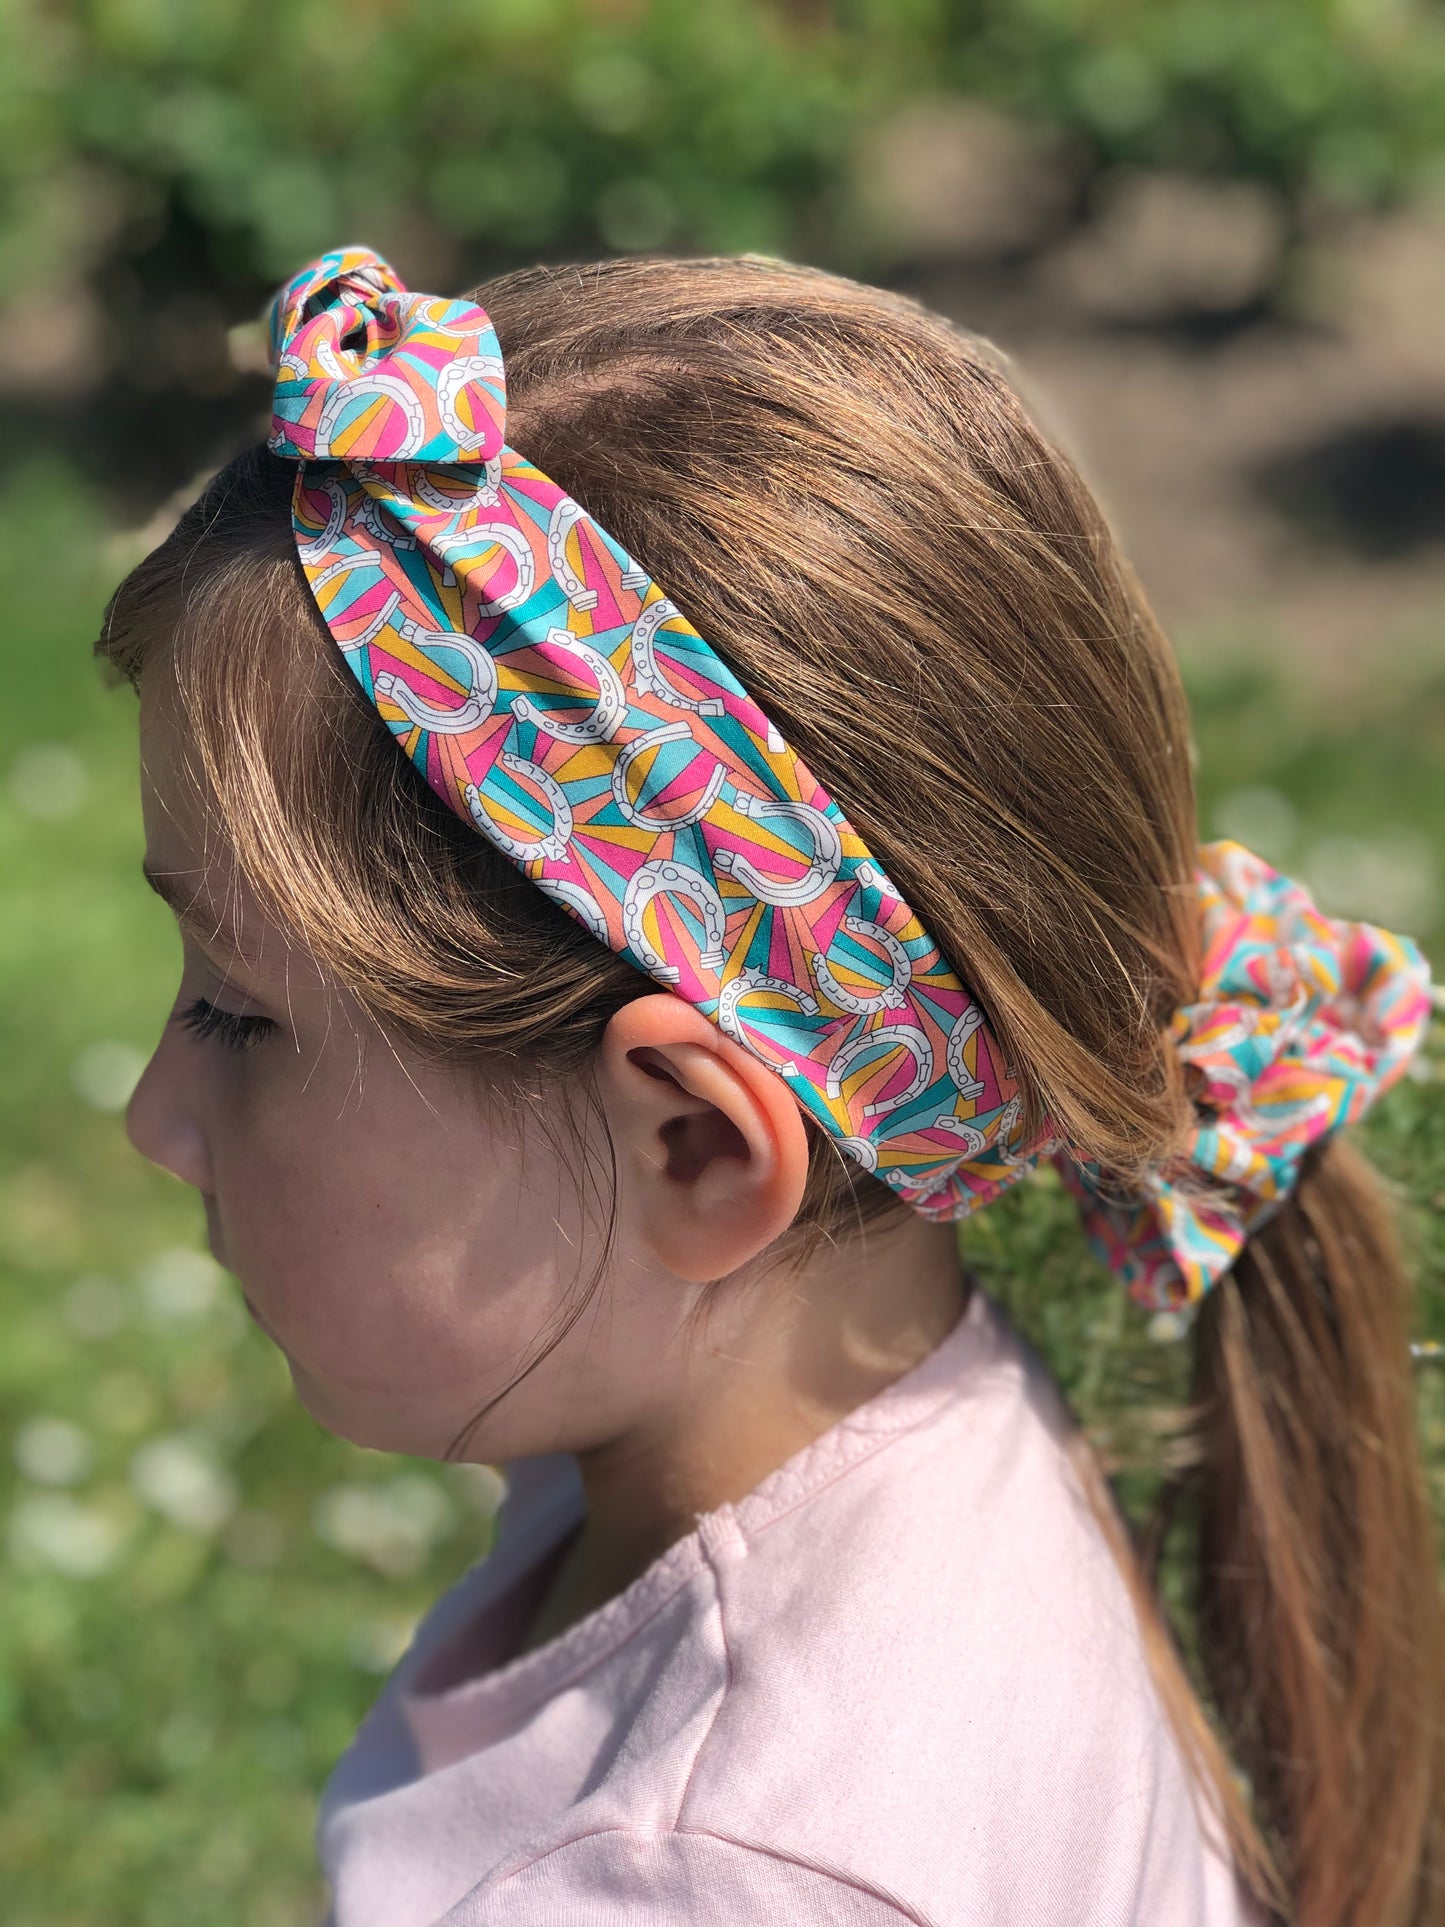 Kids Knot Tie hairband - Liberty of London Derby Day print